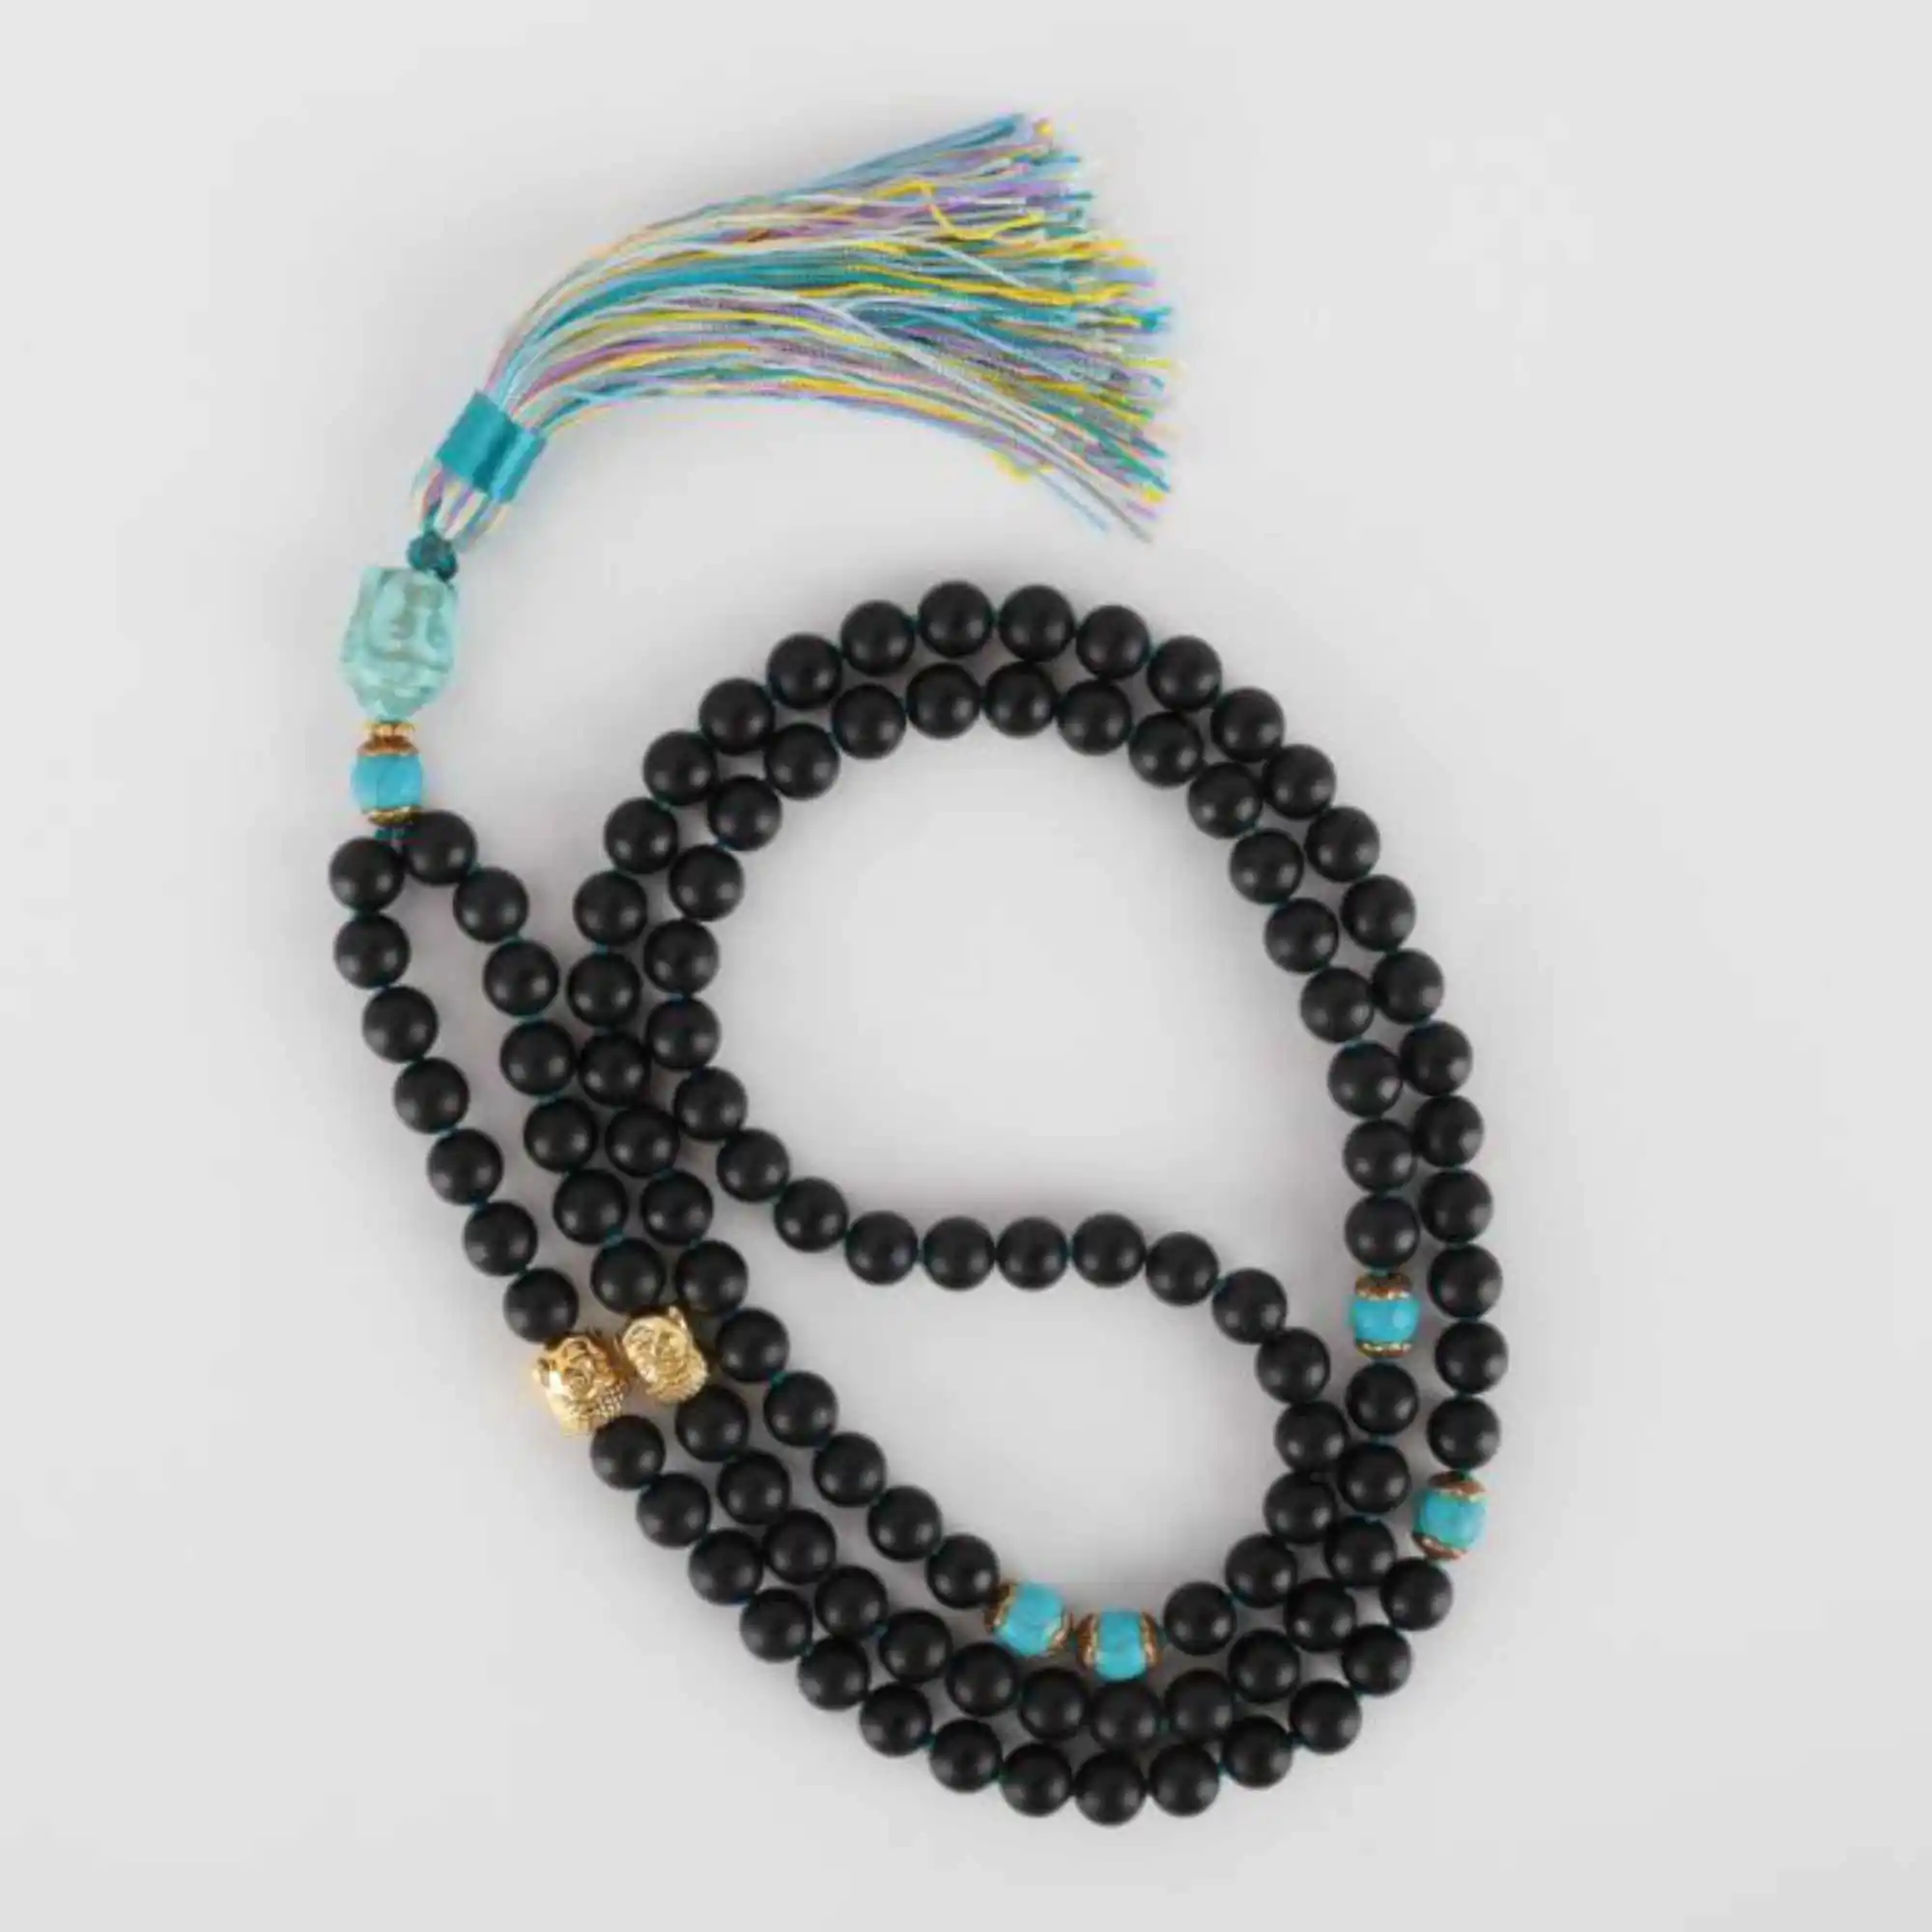 

8mm 108 Natural Scrub black agate Turquoise Bead knot Necklace Thanksgiving Day All Saints' Day Gift Bless Inspiration Elegant